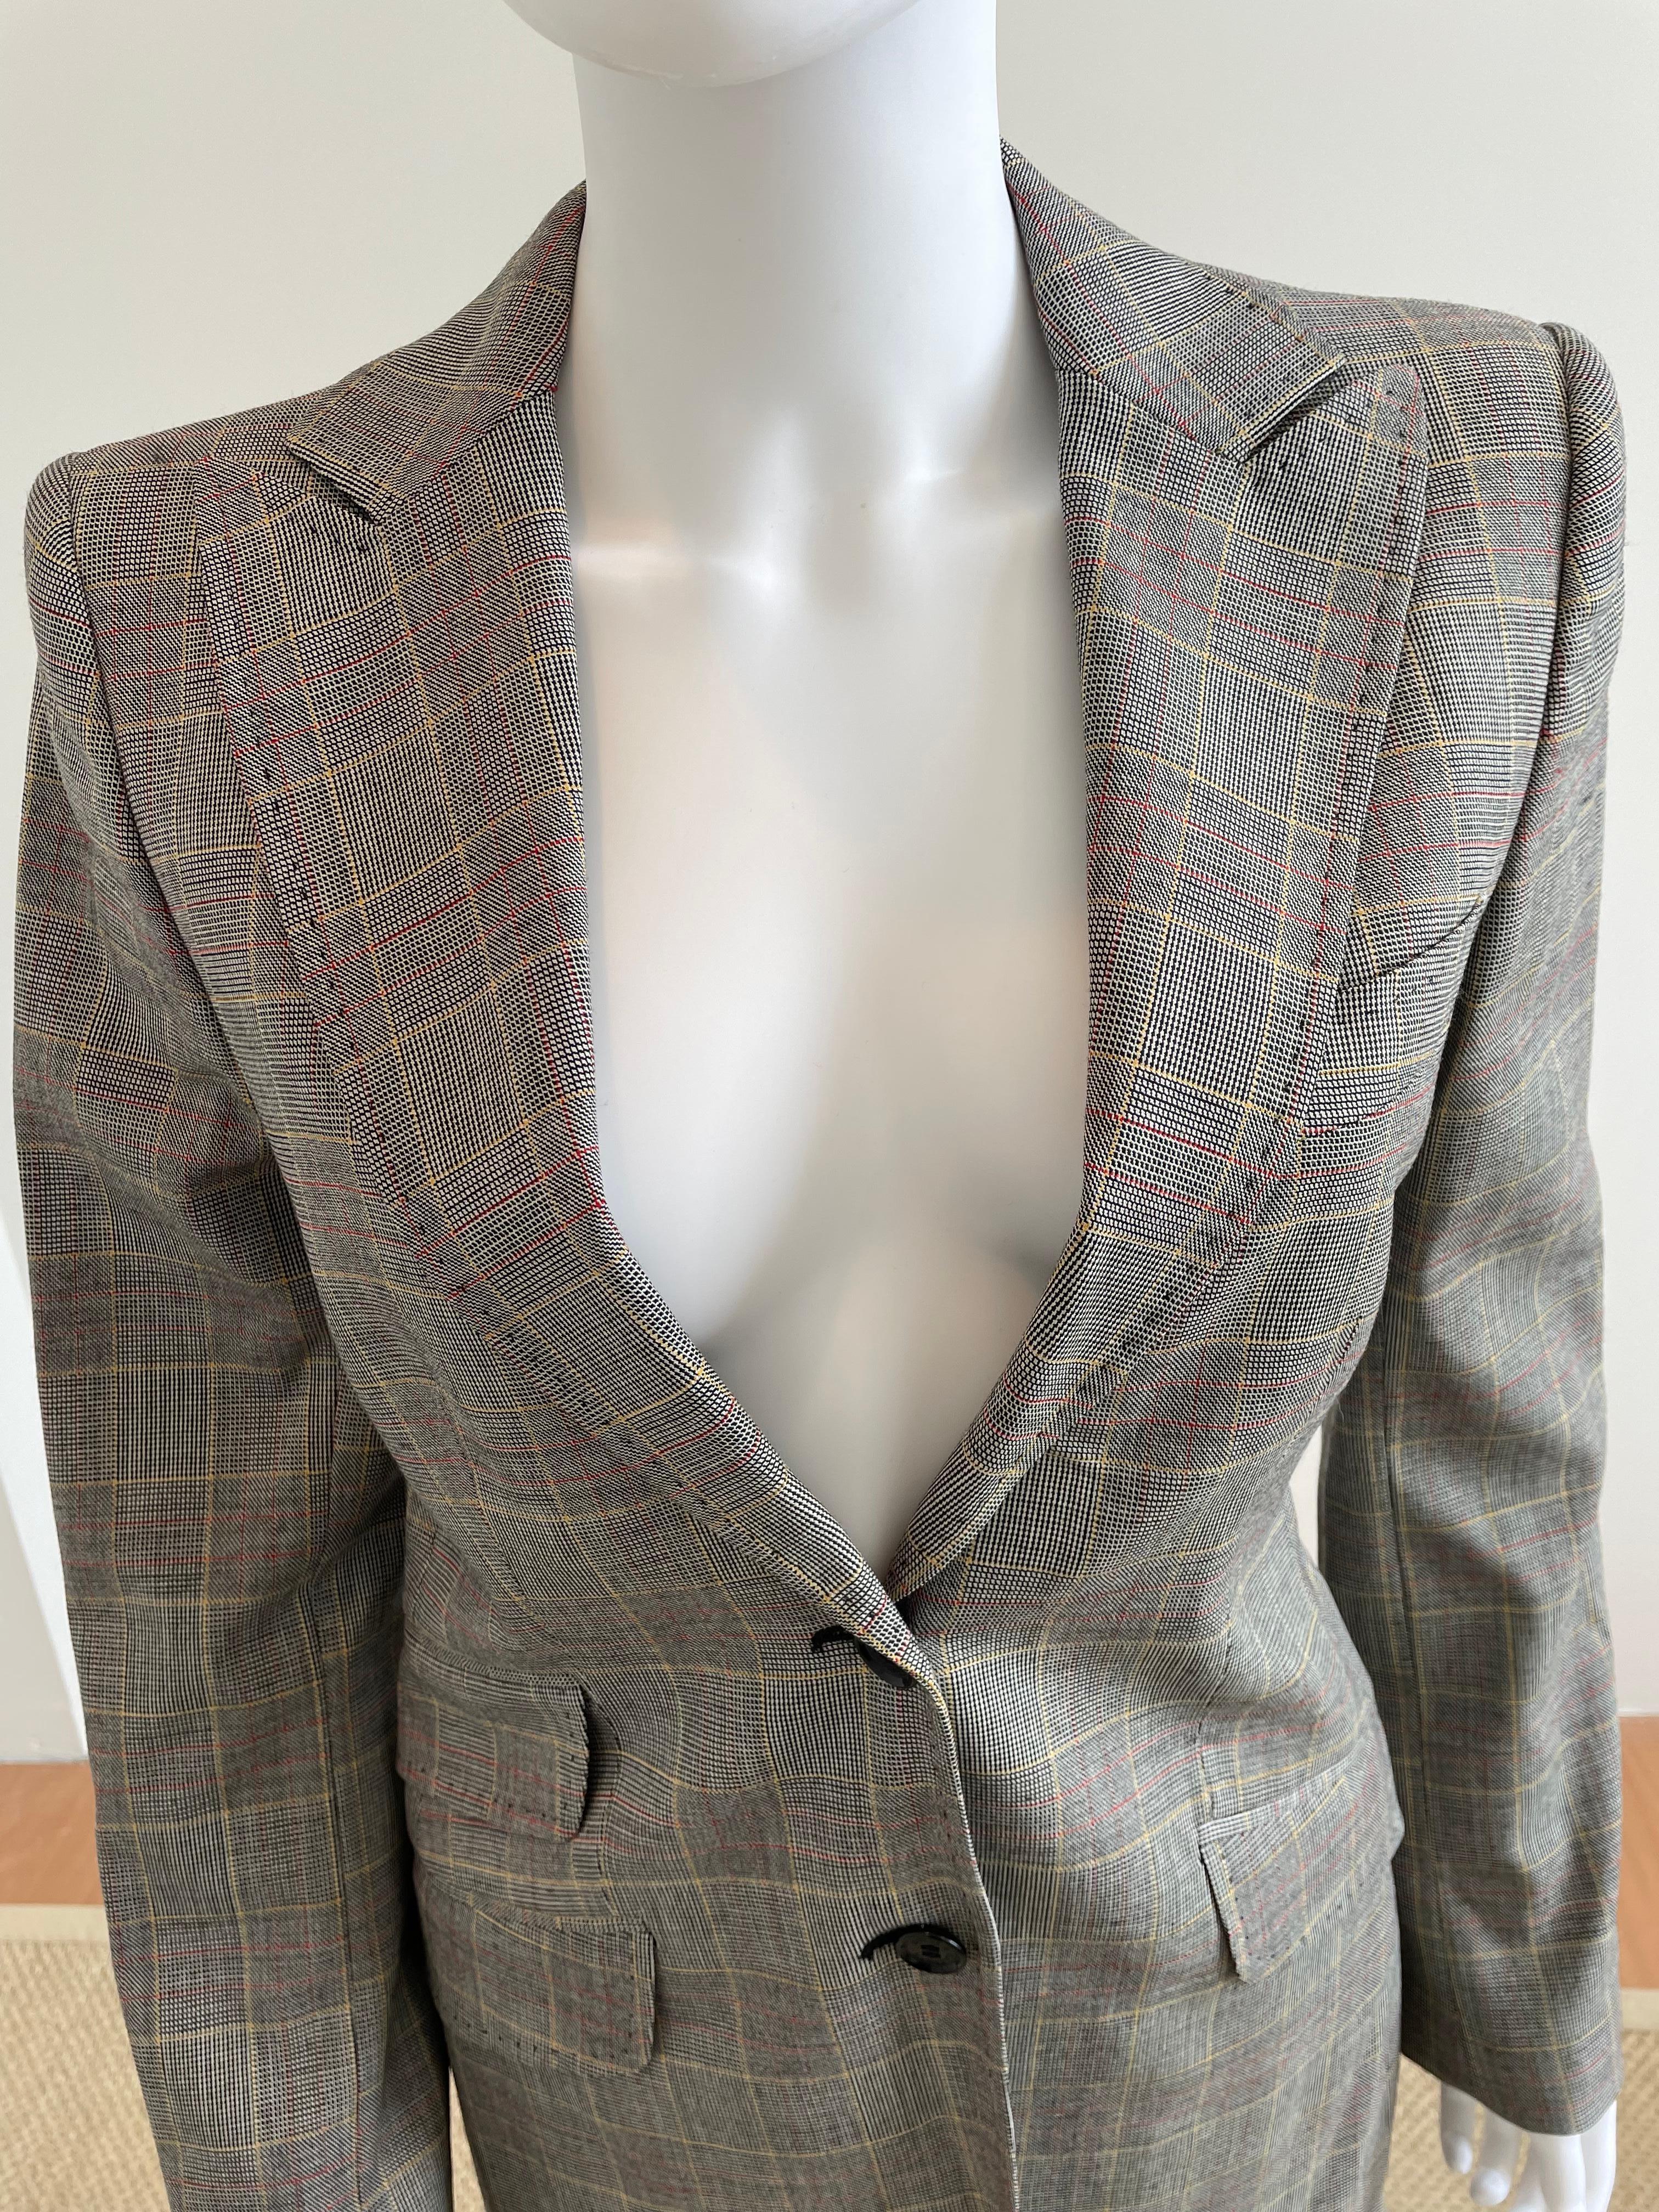 Dolce and Gabbana Plaid Peak Lapel Blazer with Matching Pants Suit. Pristine Condition. Size 42. Made in Italy. 90% Wool.